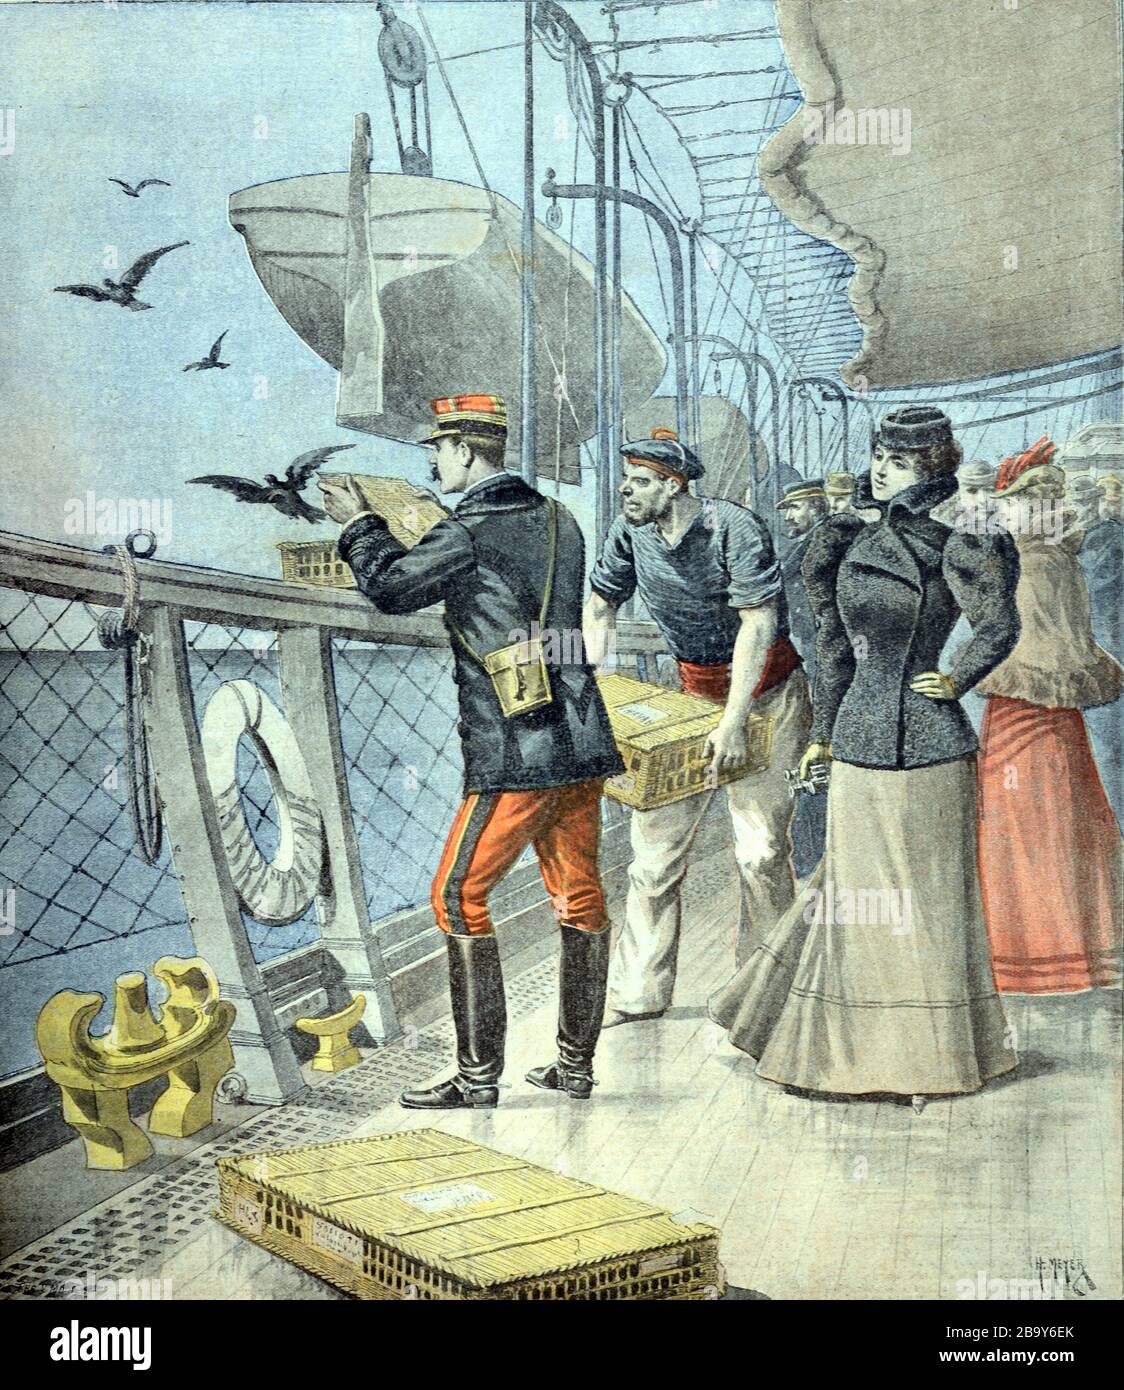 Early Experiment with Carrier Pigeons by French Soldier Sending Homing Pigeons from French Ship1898. Vintage or Old Illustration Stock Photo